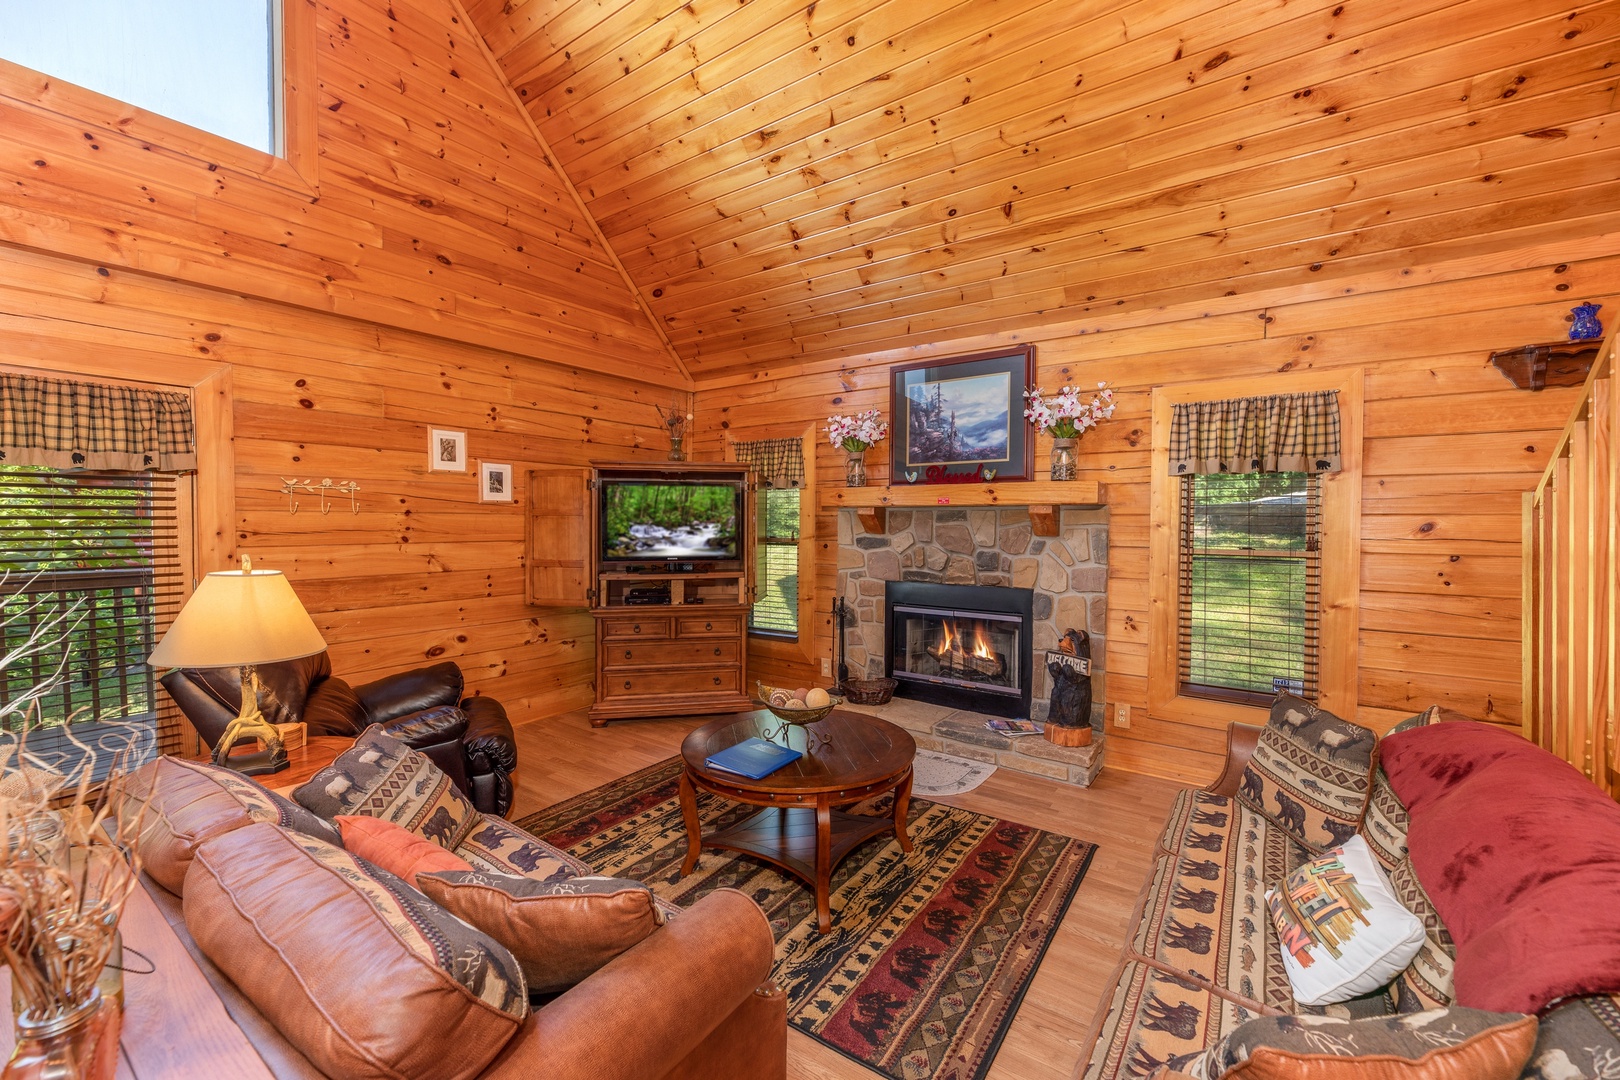 Living room with TV and fireplace at Grand View, a 3 bedroom cabin rental located in Sevierville